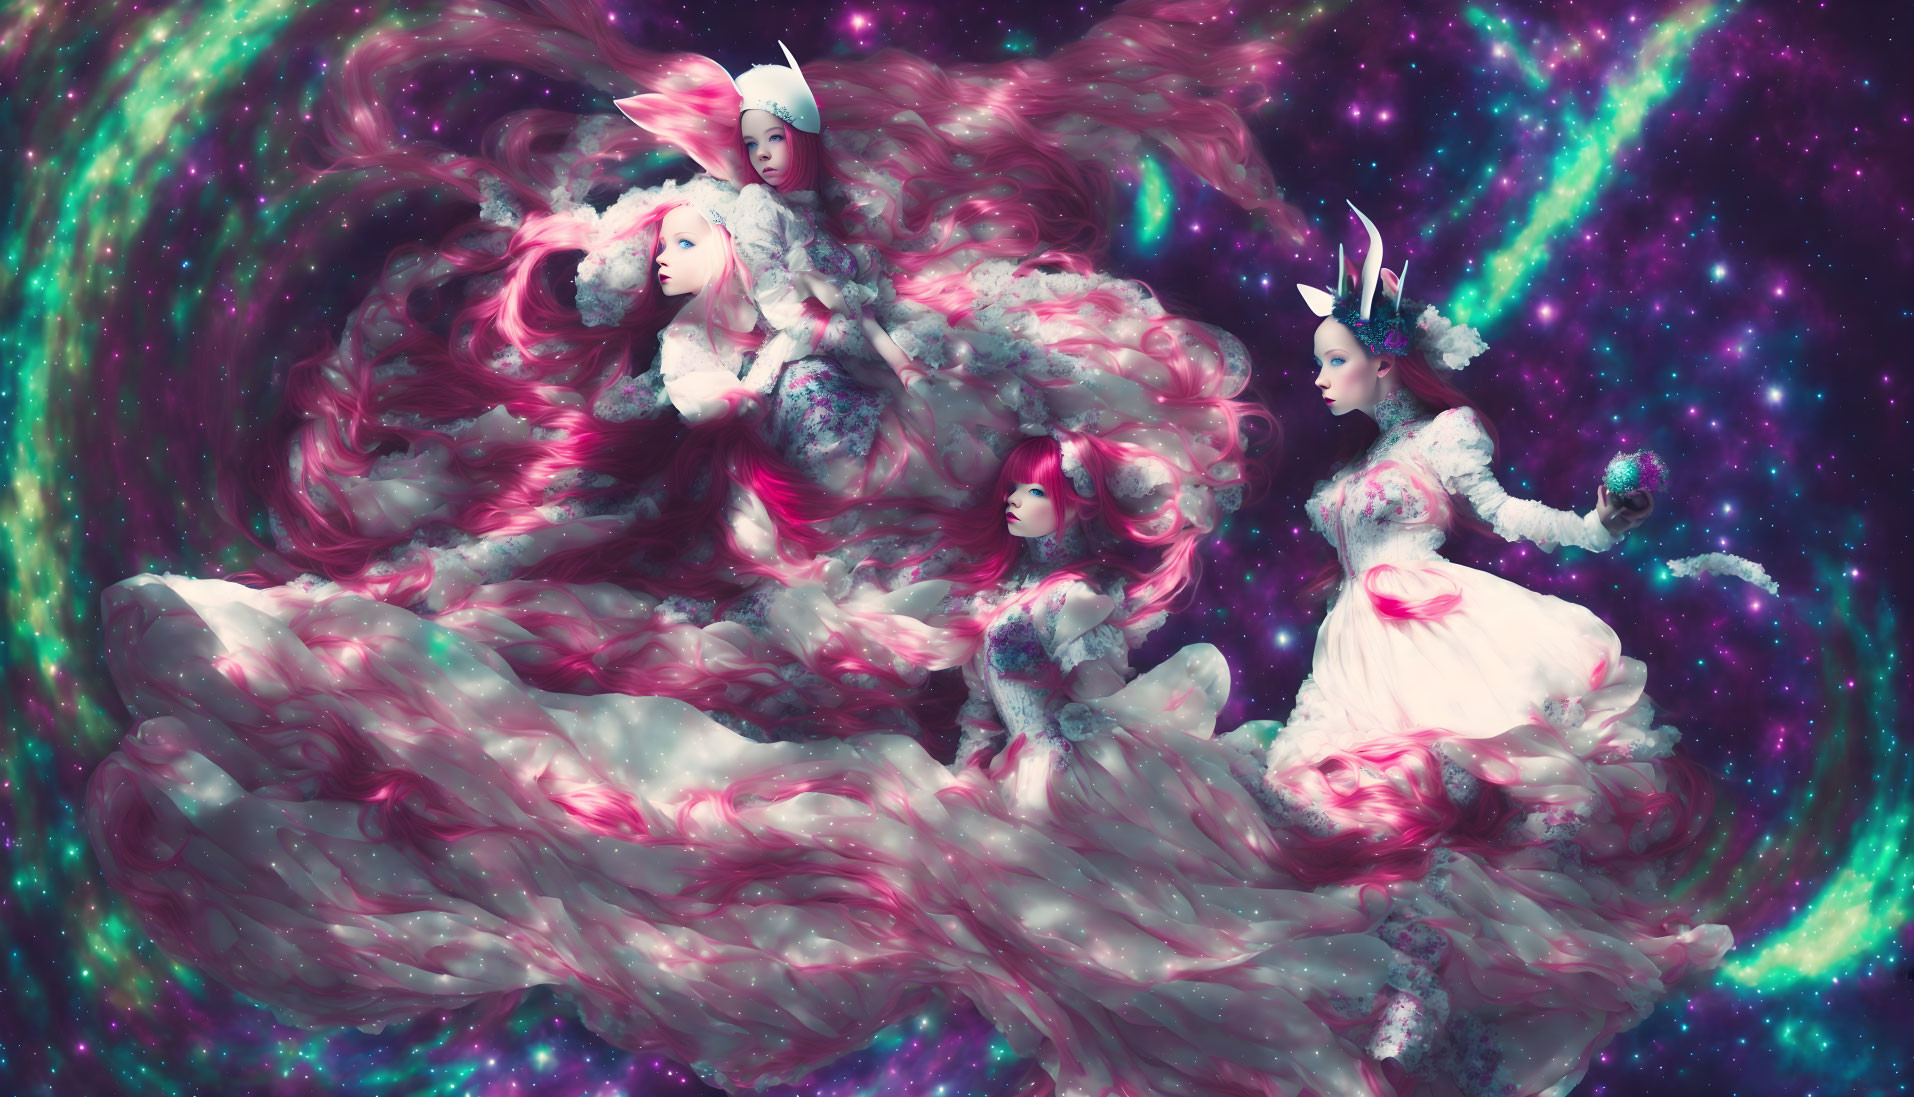 Ethereal beings with ornate headdresses in vibrant cosmic clouds